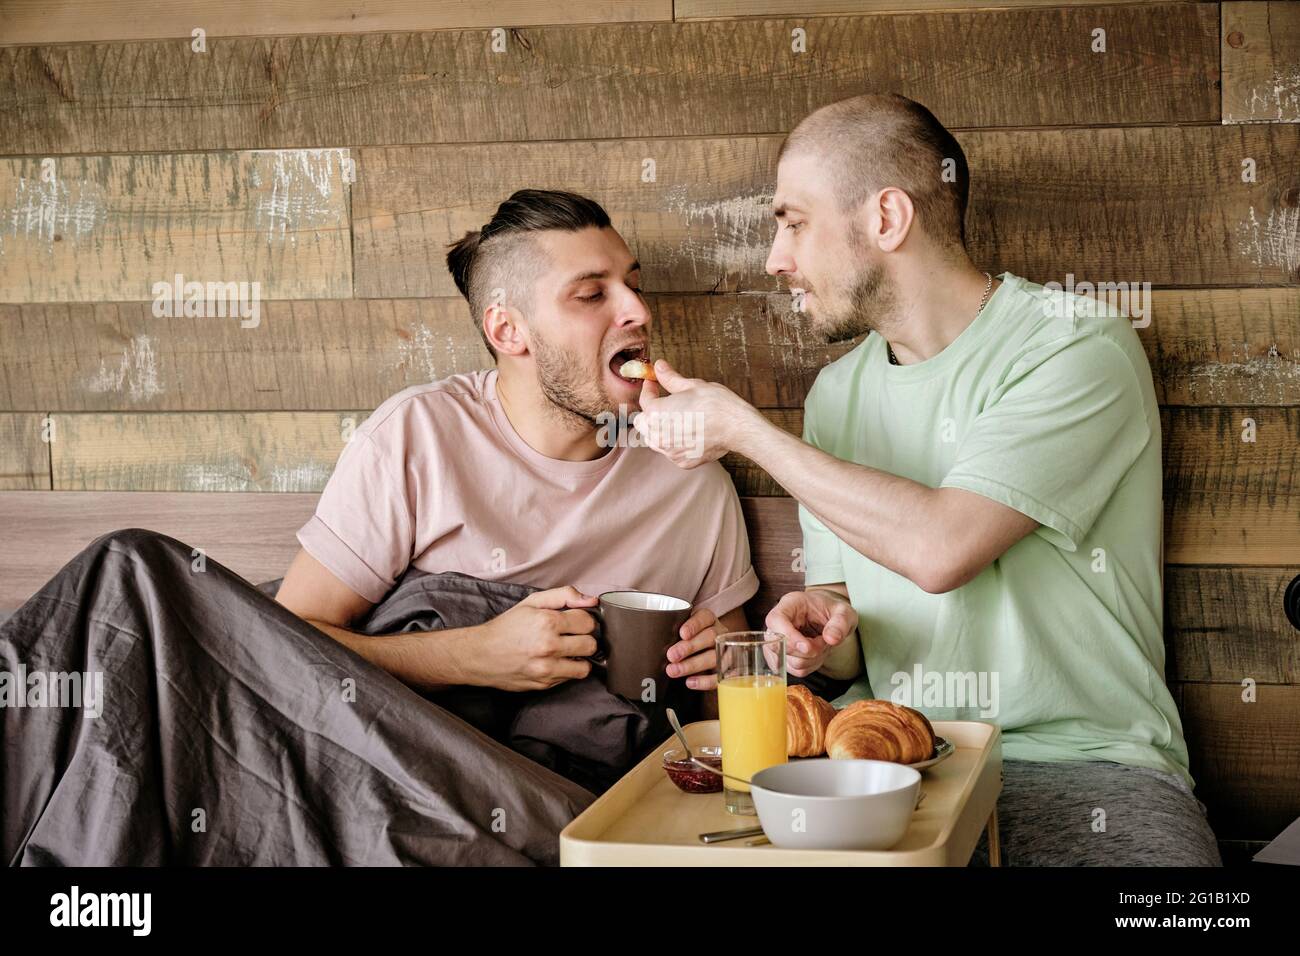 Young gay man putting cookie into mouth of his boyfriend during breakfast in bed Stock Photo